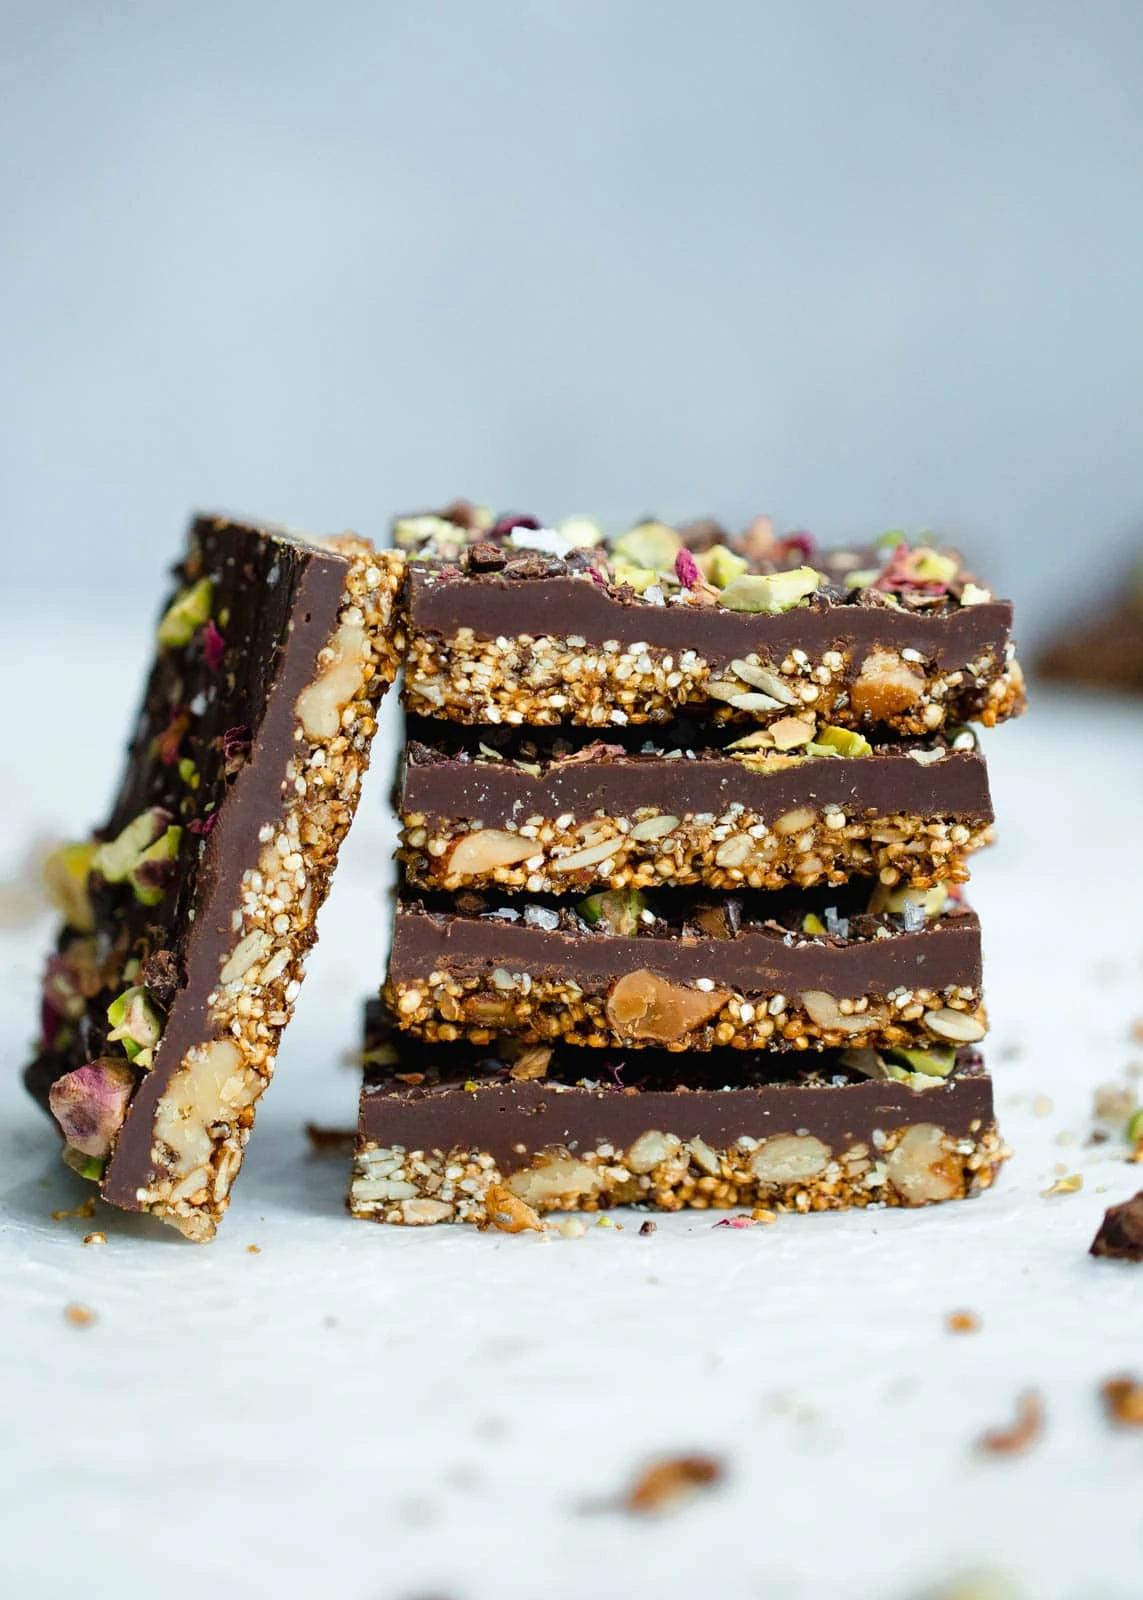 A healthier alternative to a chocolate bar, this Quinoa Chocolate Bark is filled with nuts and seeds to keep you full all afternoon!